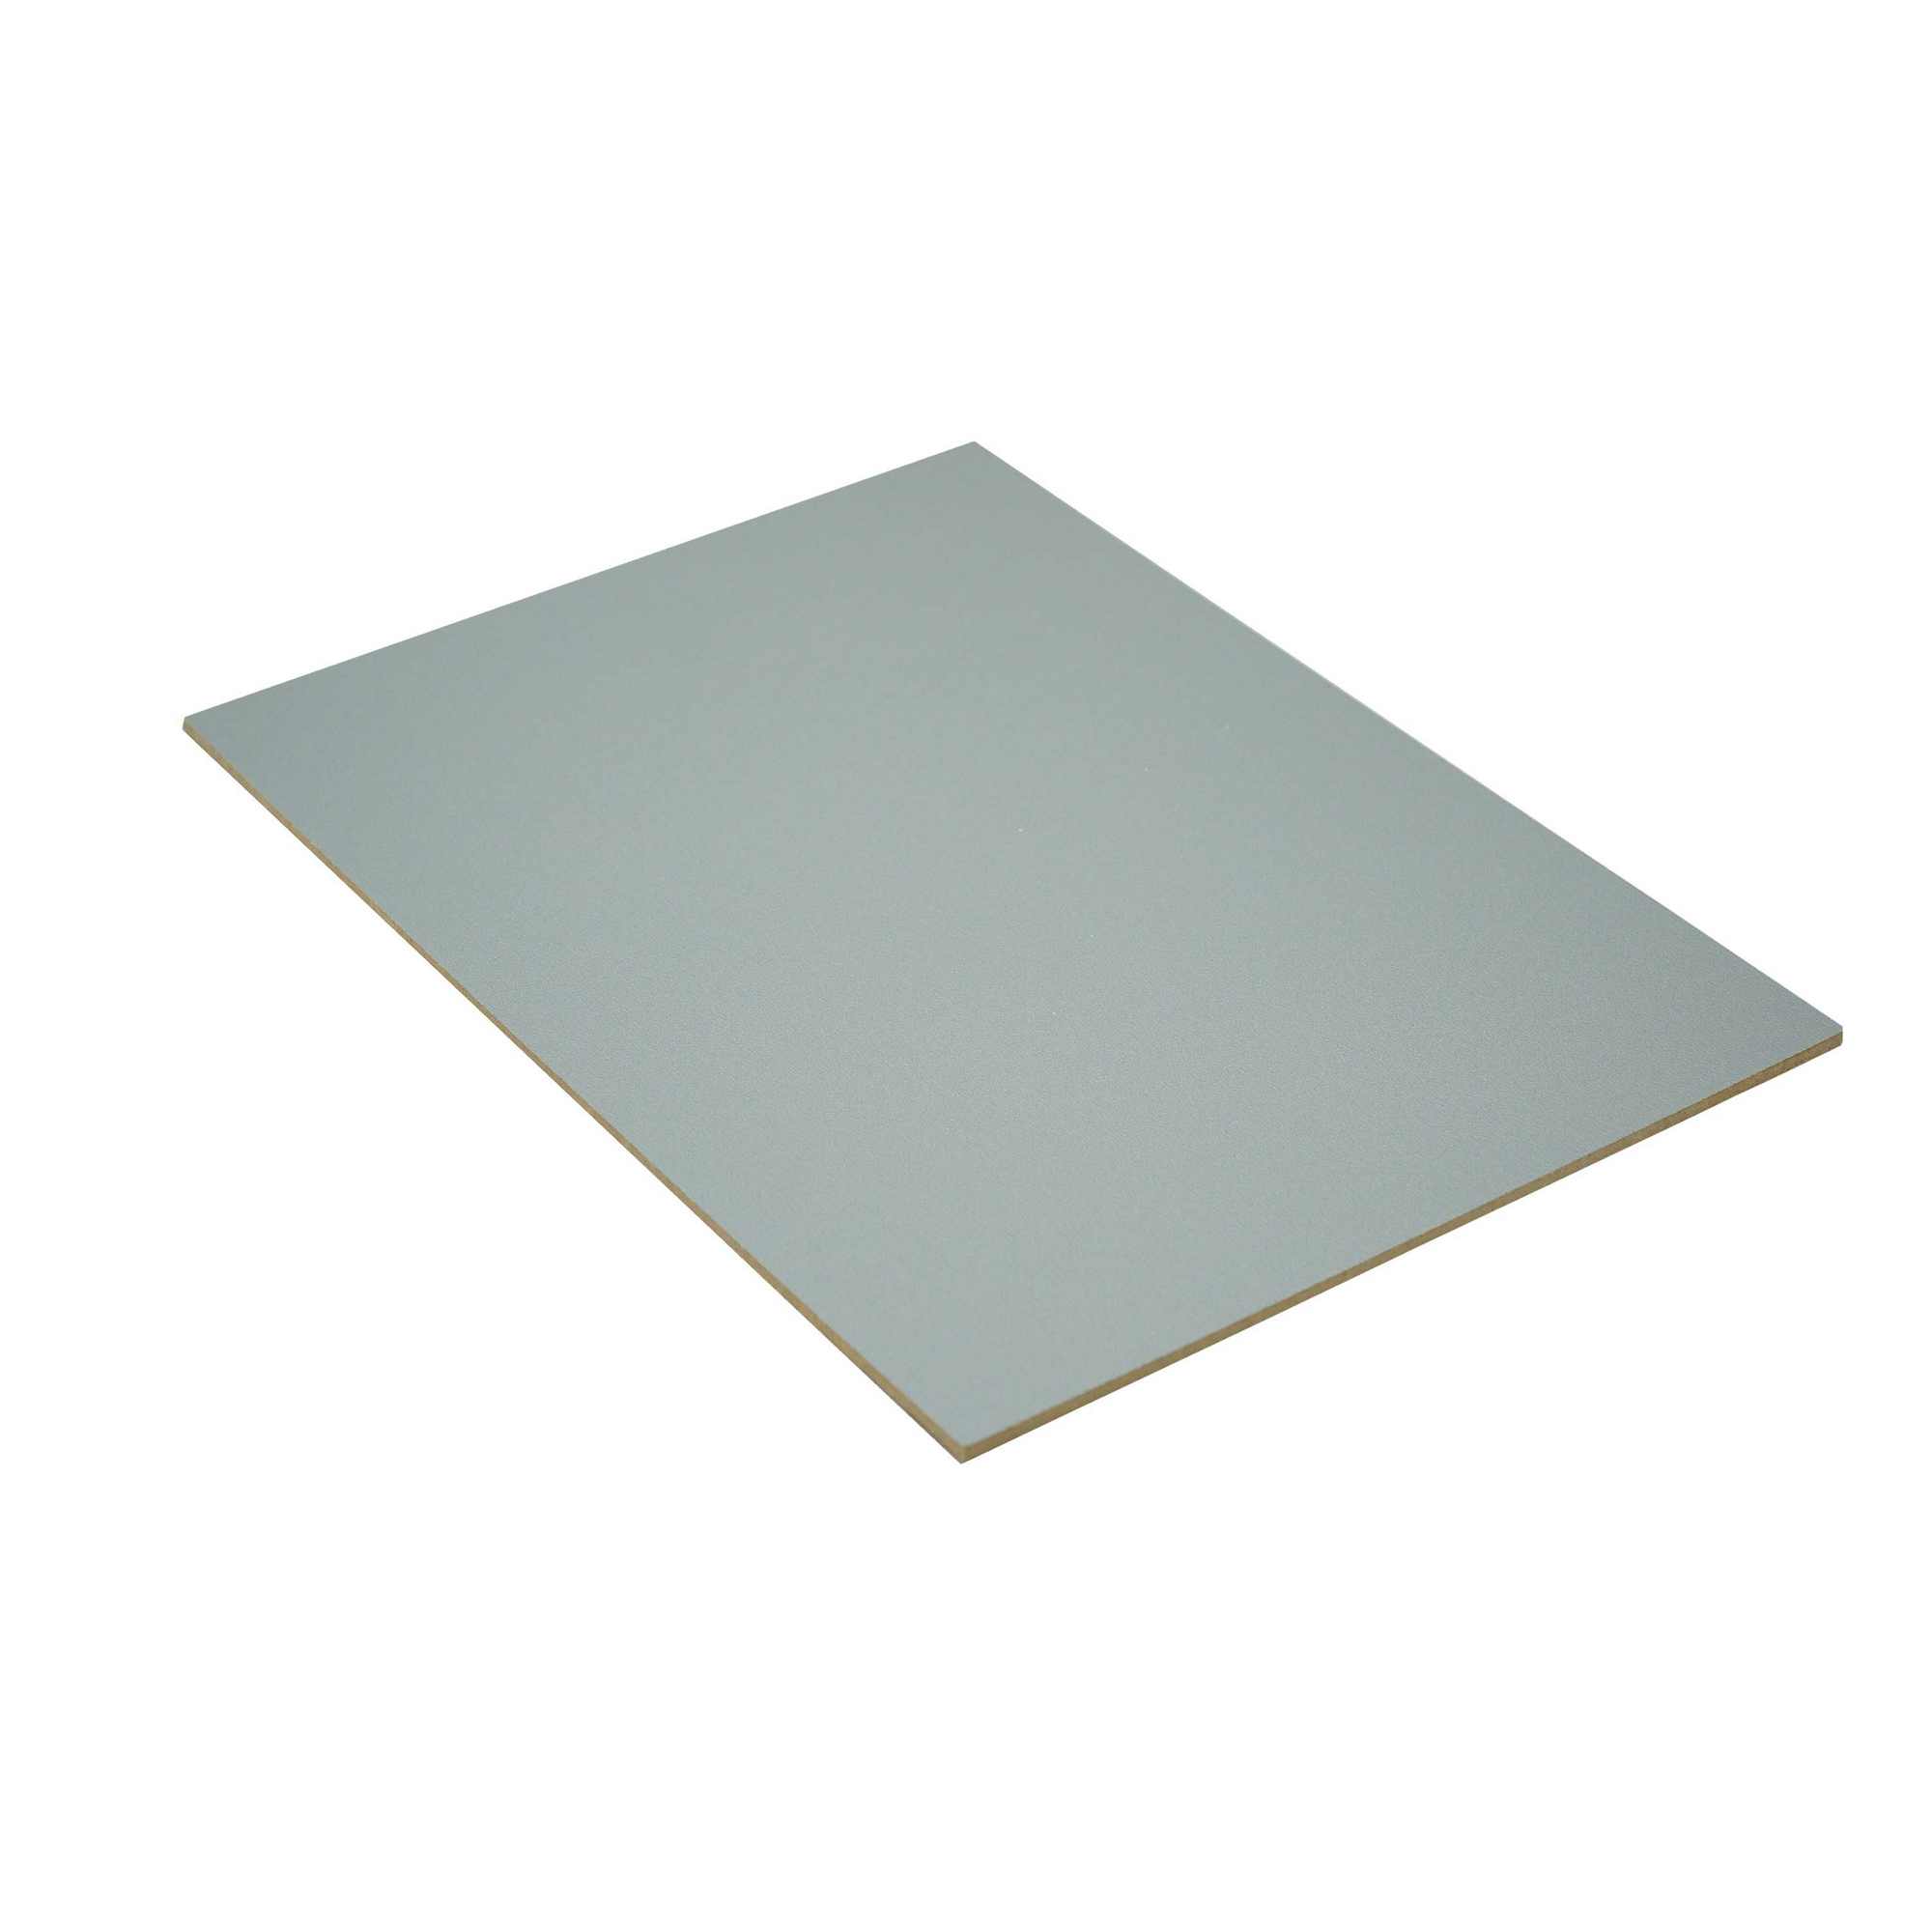 HDF-Platte lackiert silber 1200 x 600 x 3 mm + product picture